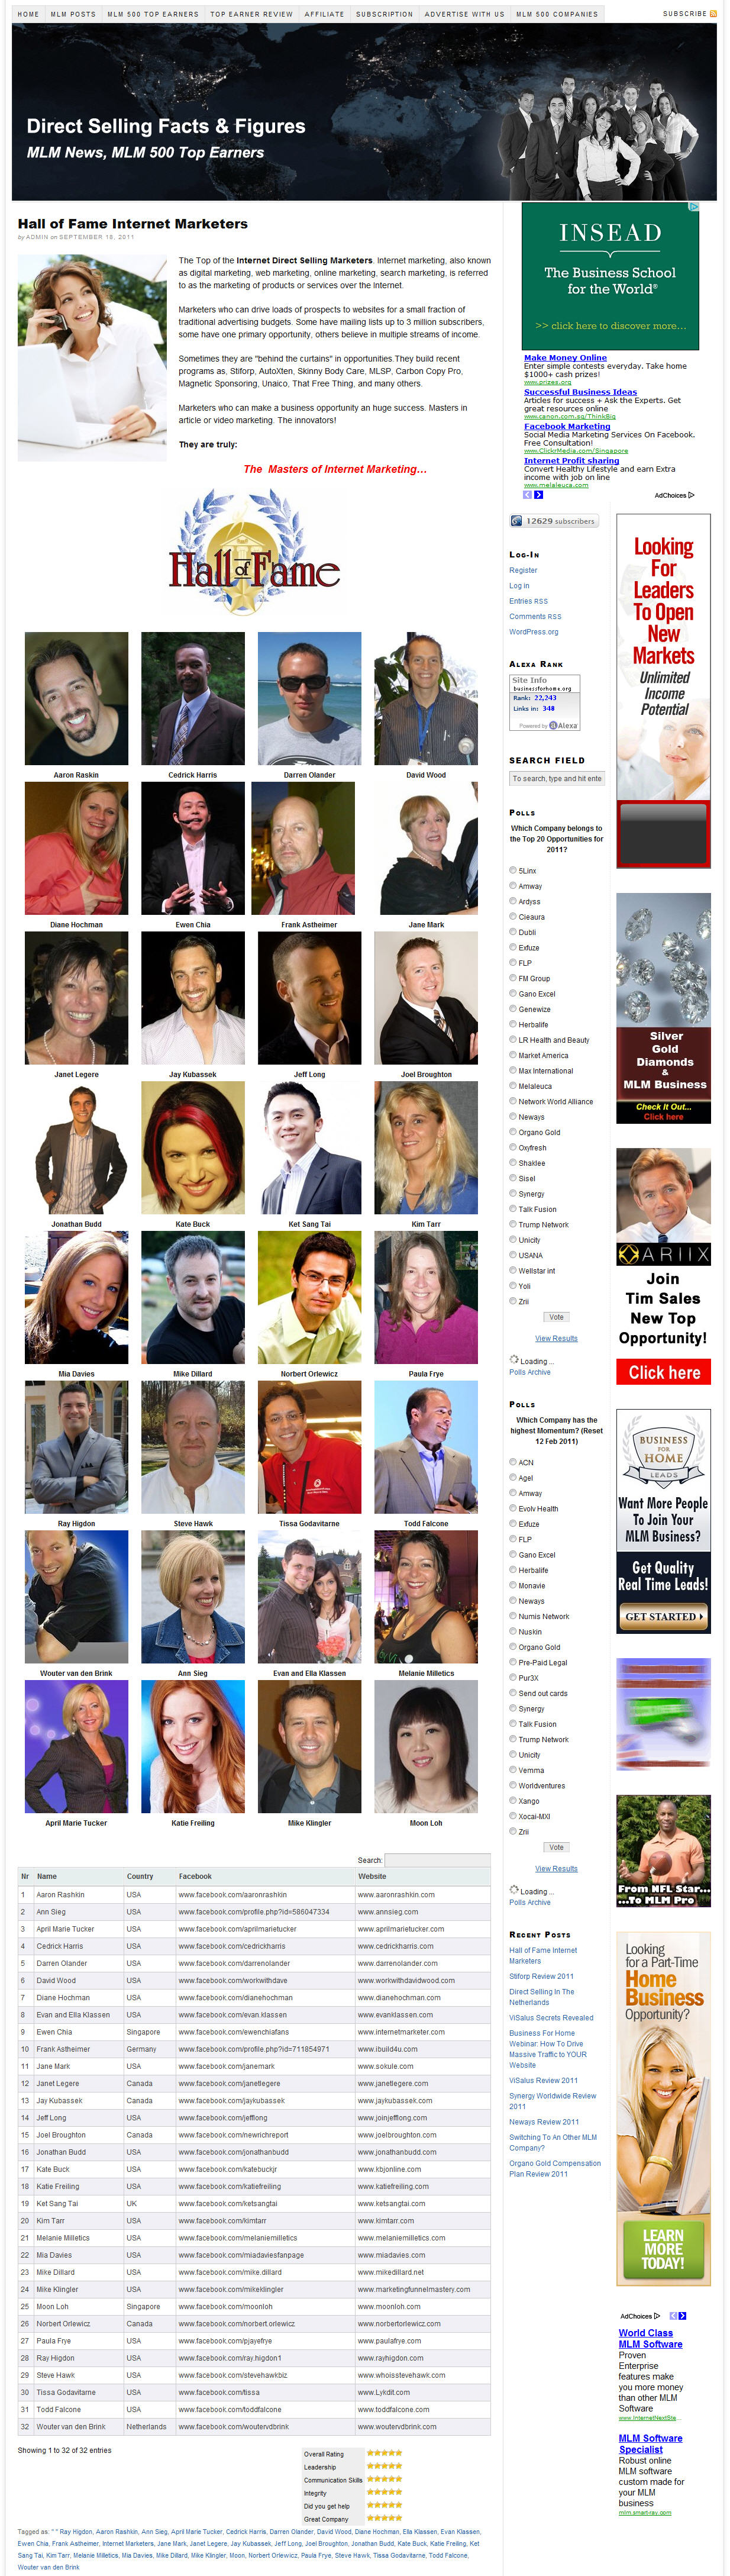 Hall Of Fame Internet Marketers 